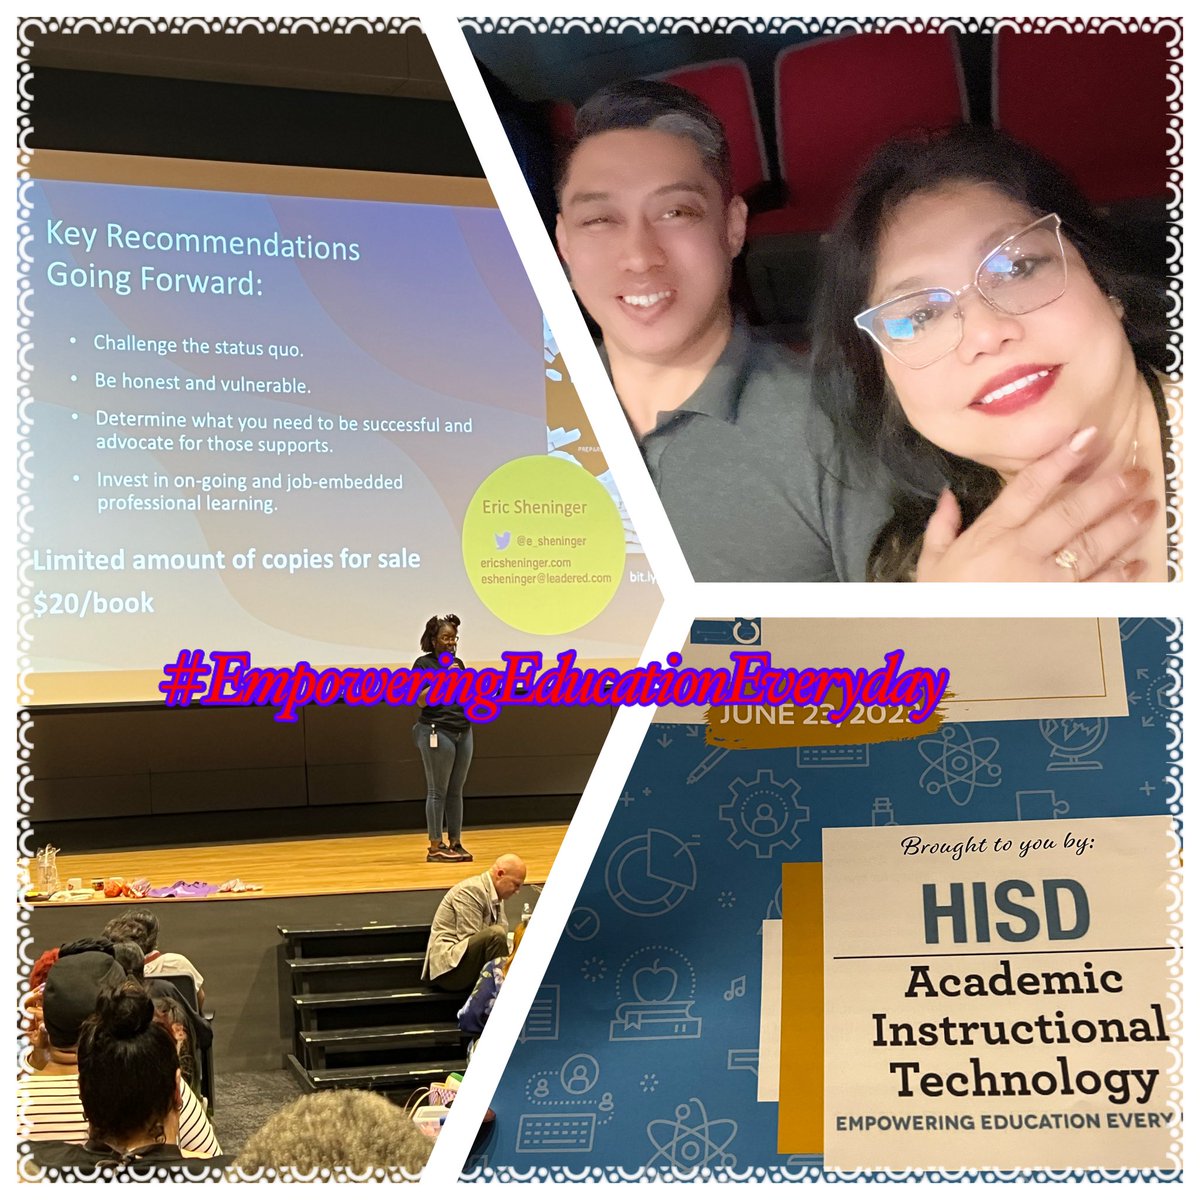 Amidst reApplying for a job, here I am Empowering Education Everyday! Absolute reflection of Excellence 😃👏😂@WhoAreWe_SGA #HISD_E3 @WilliamsMath985 @HISD_Inst_tech